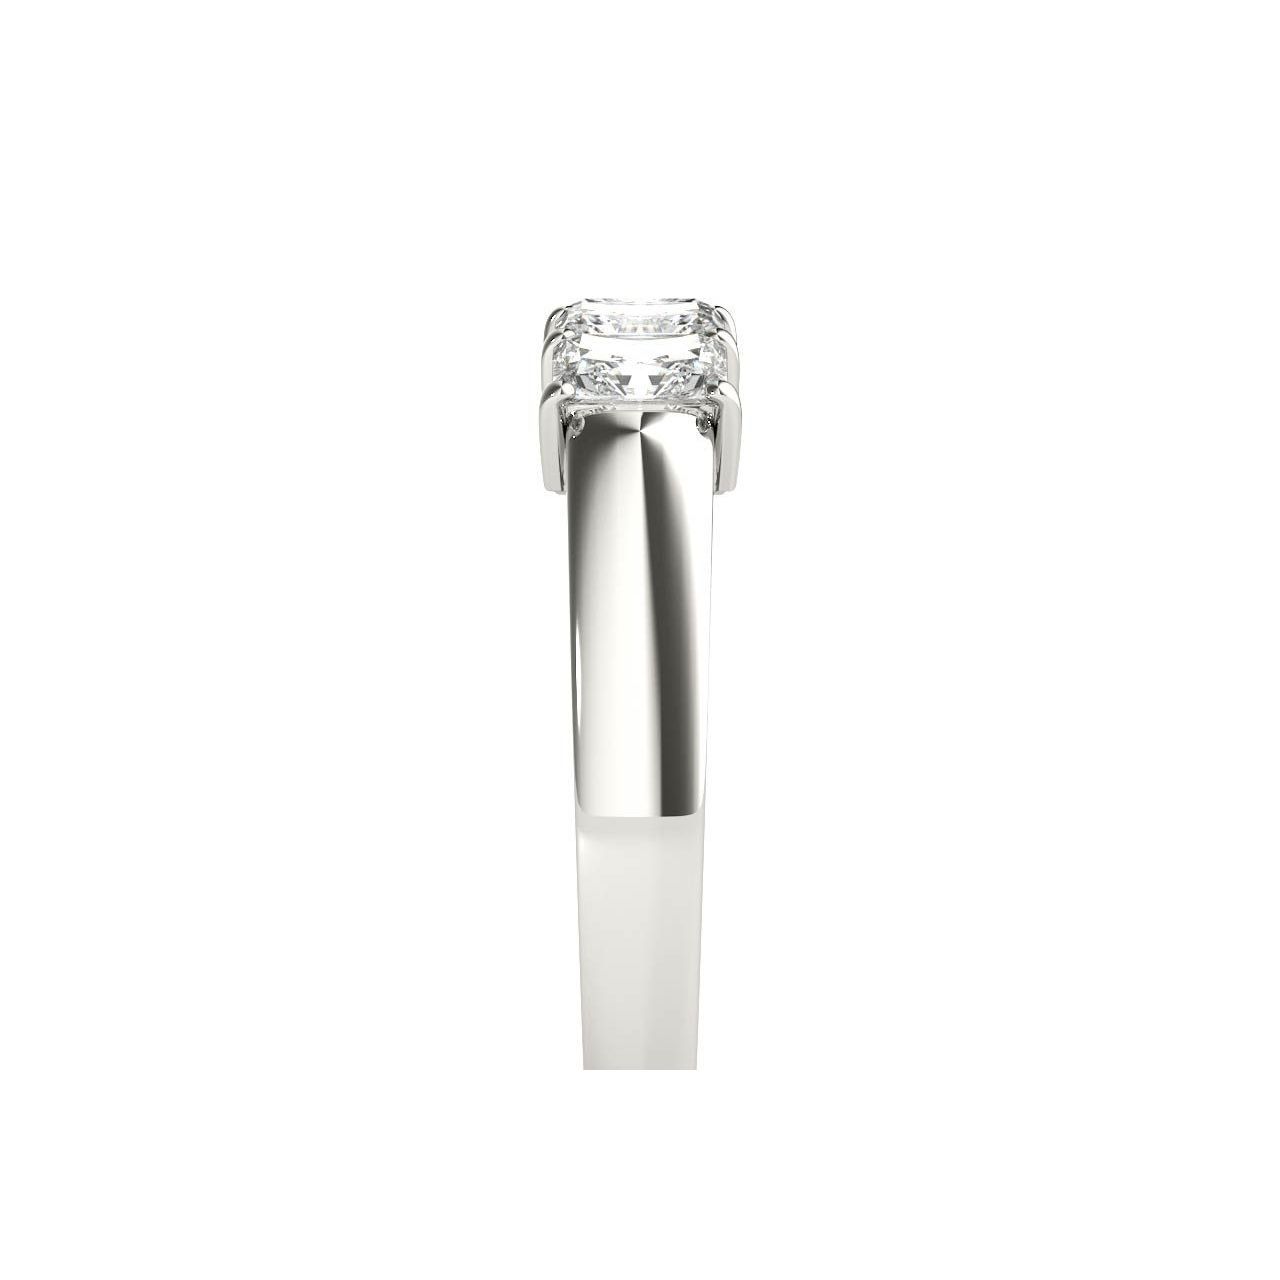 7.5 Ctw Solitaire Radiant-Cut Engagement Ring In 18K Gold